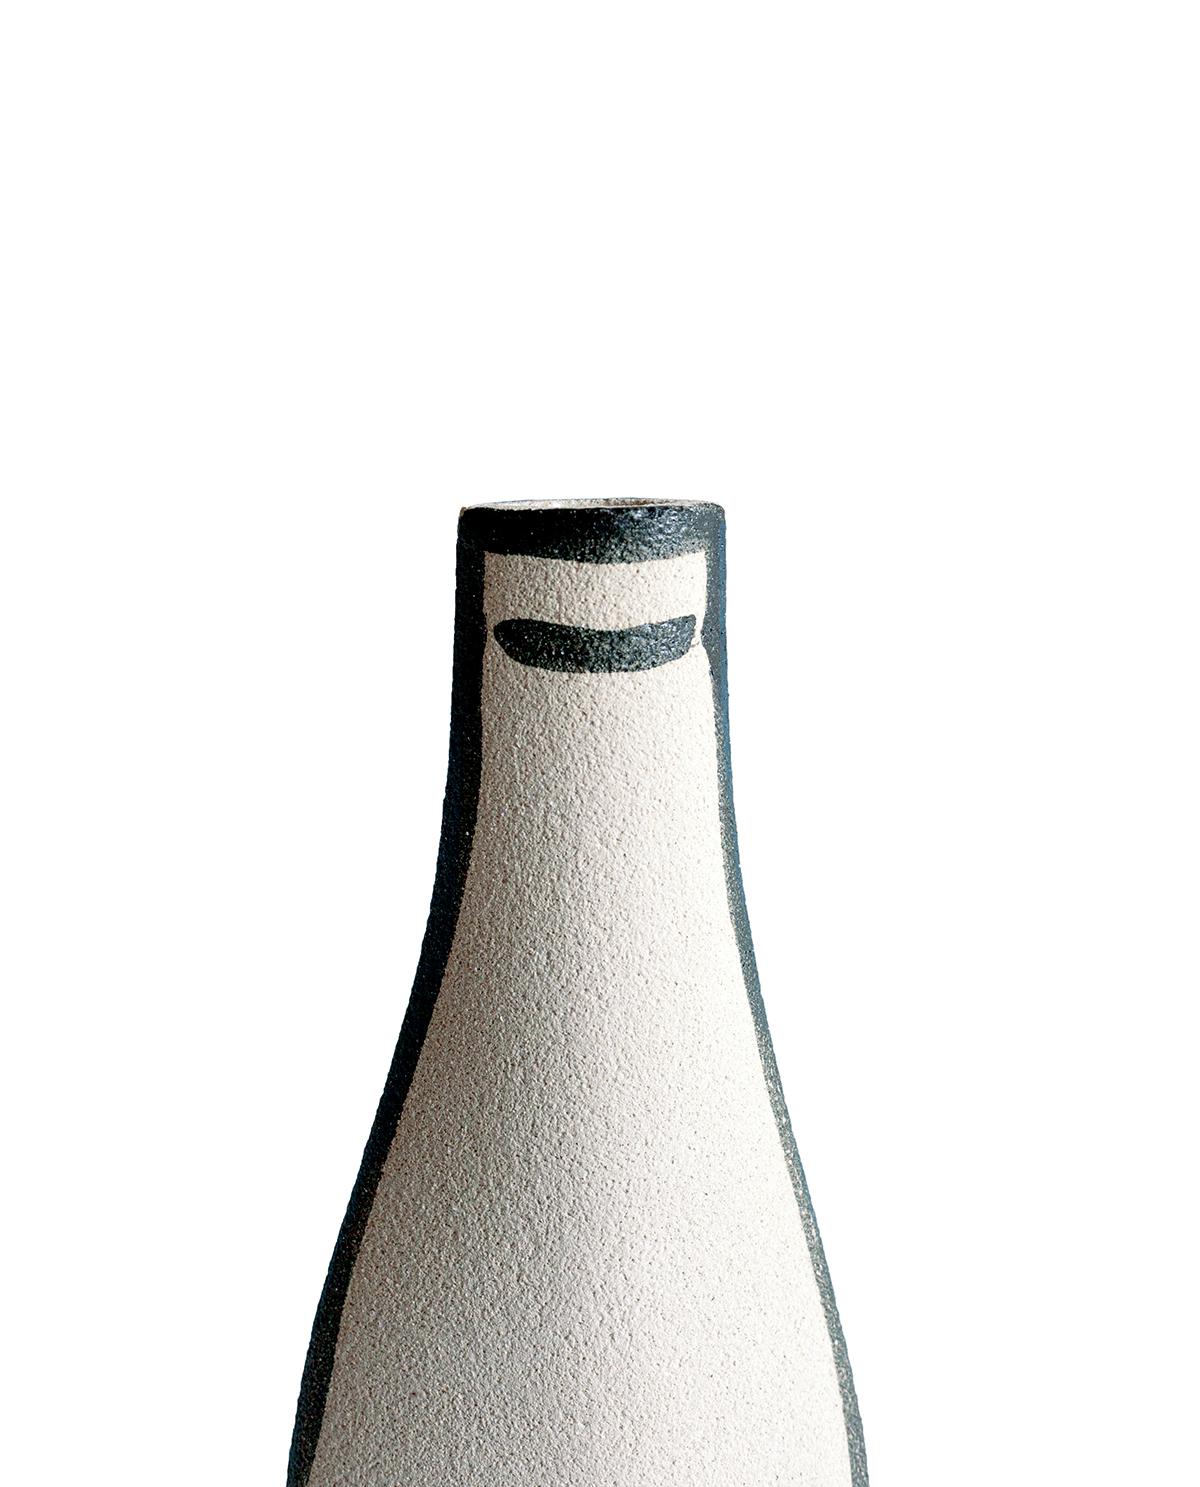 European 21st Century ‘Morandi Bouteille - Black’, in White Ceramic, Crafted in France For Sale